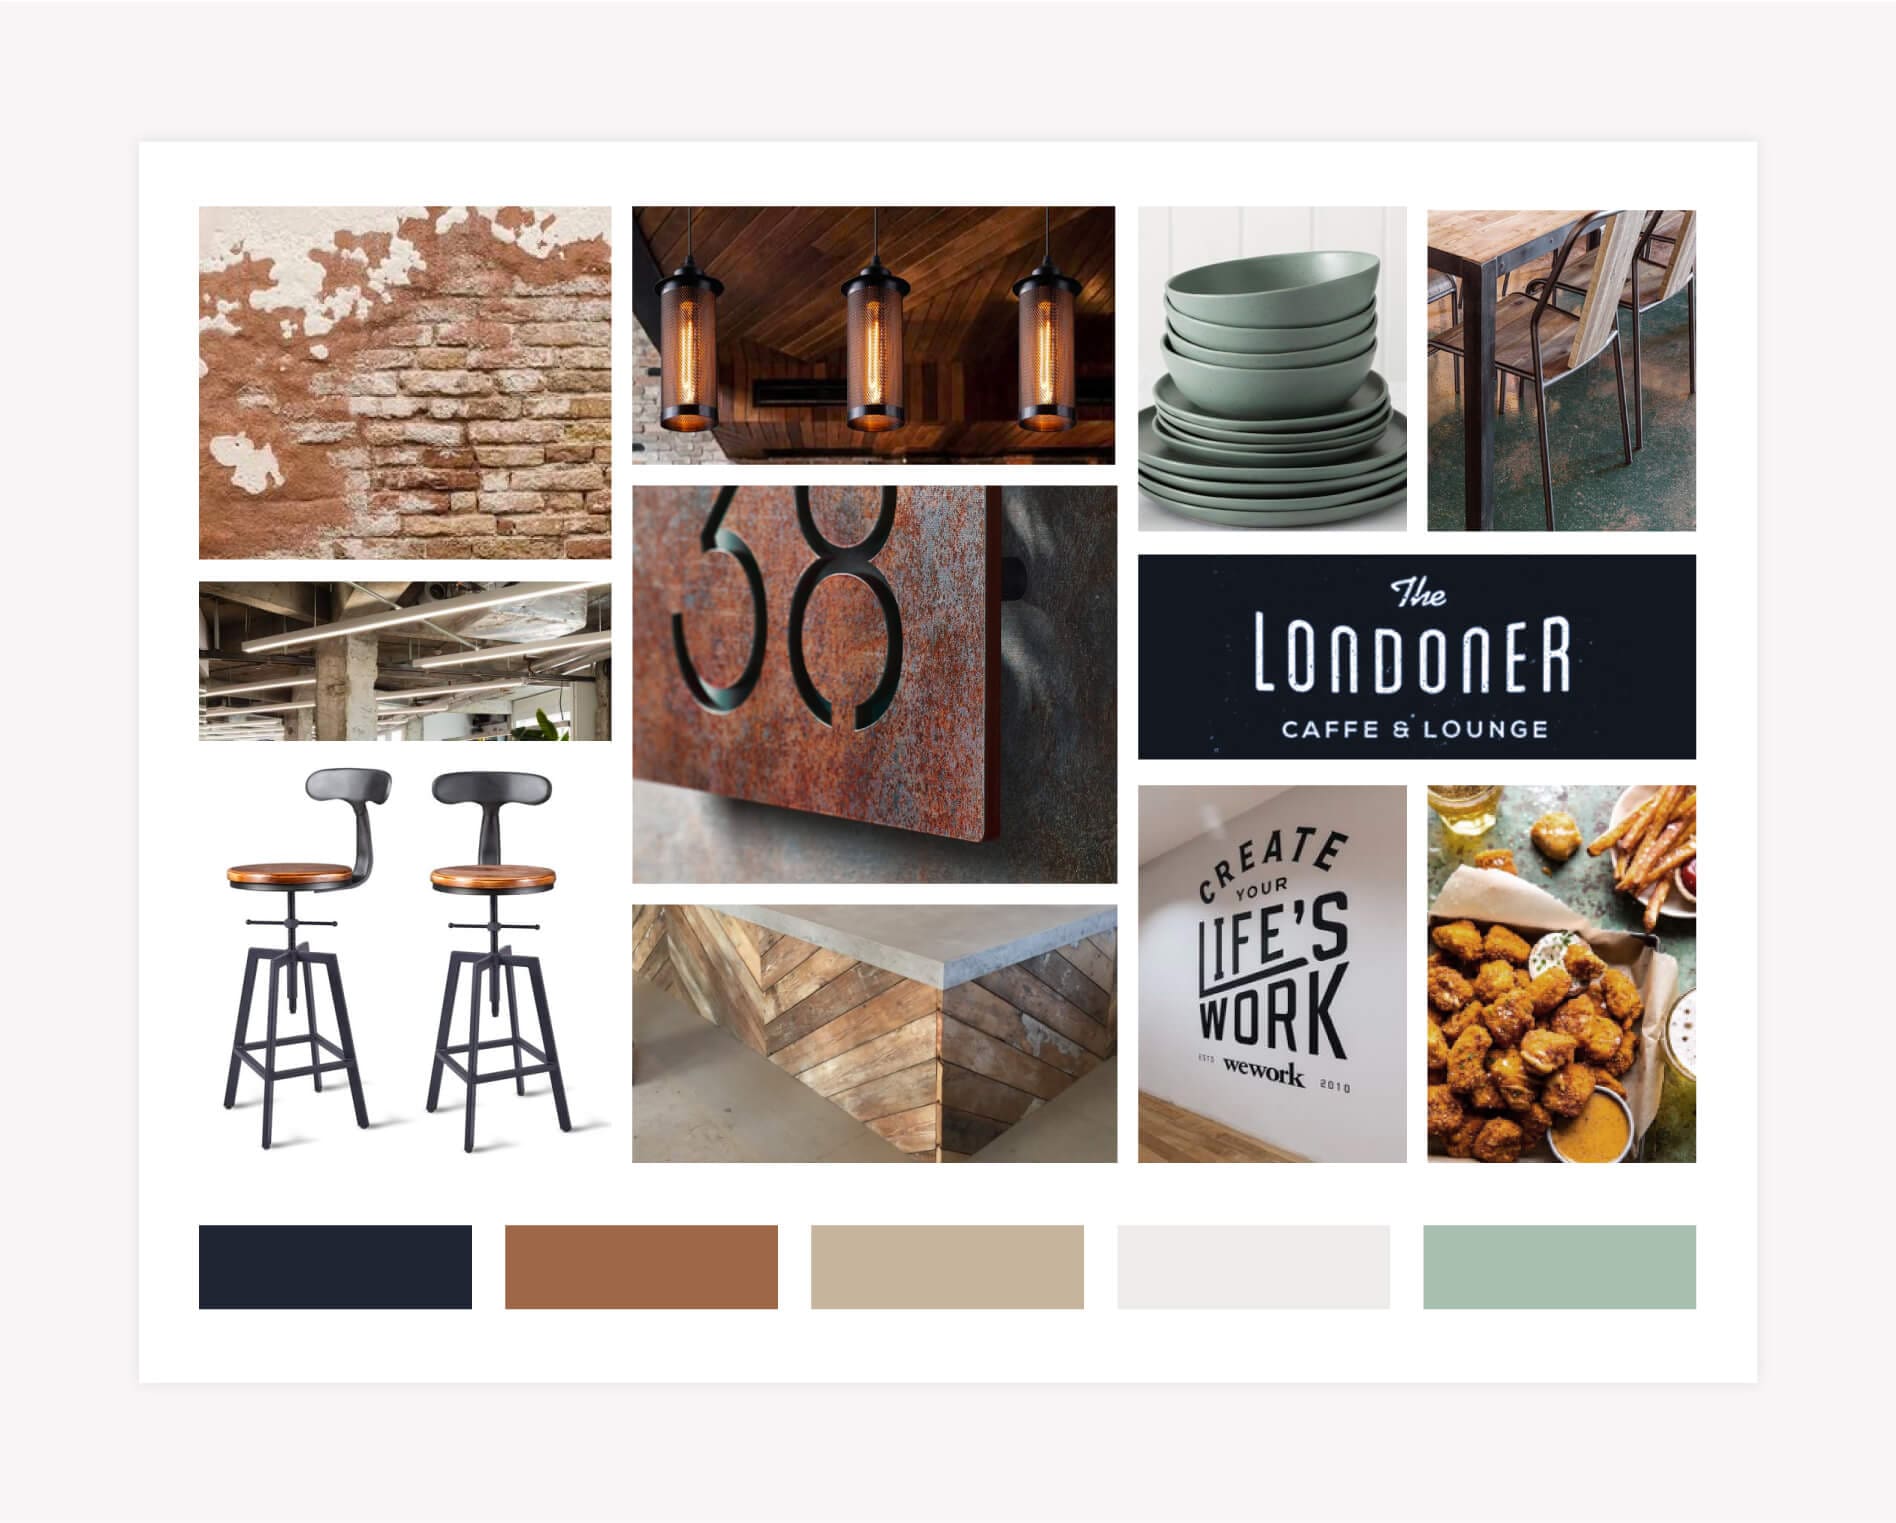 Mood board used to help with restaurant branding